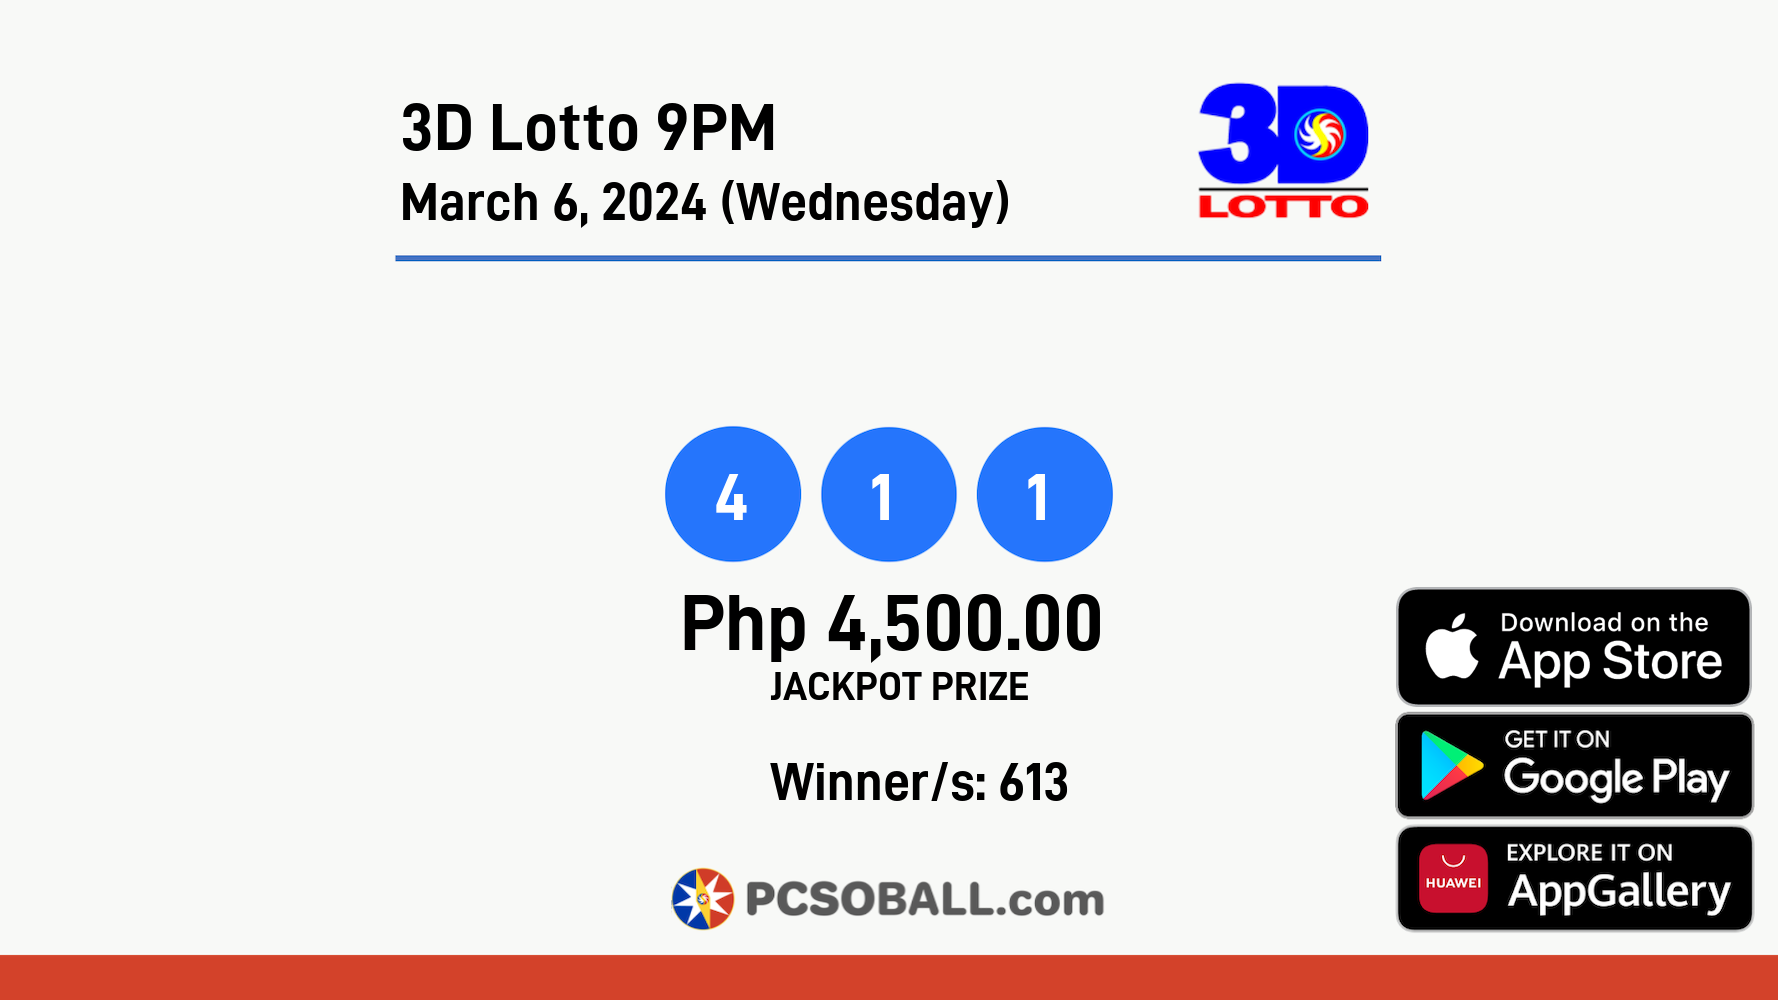 3D Lotto 9PM March 6, 2024 (Wednesday) Result